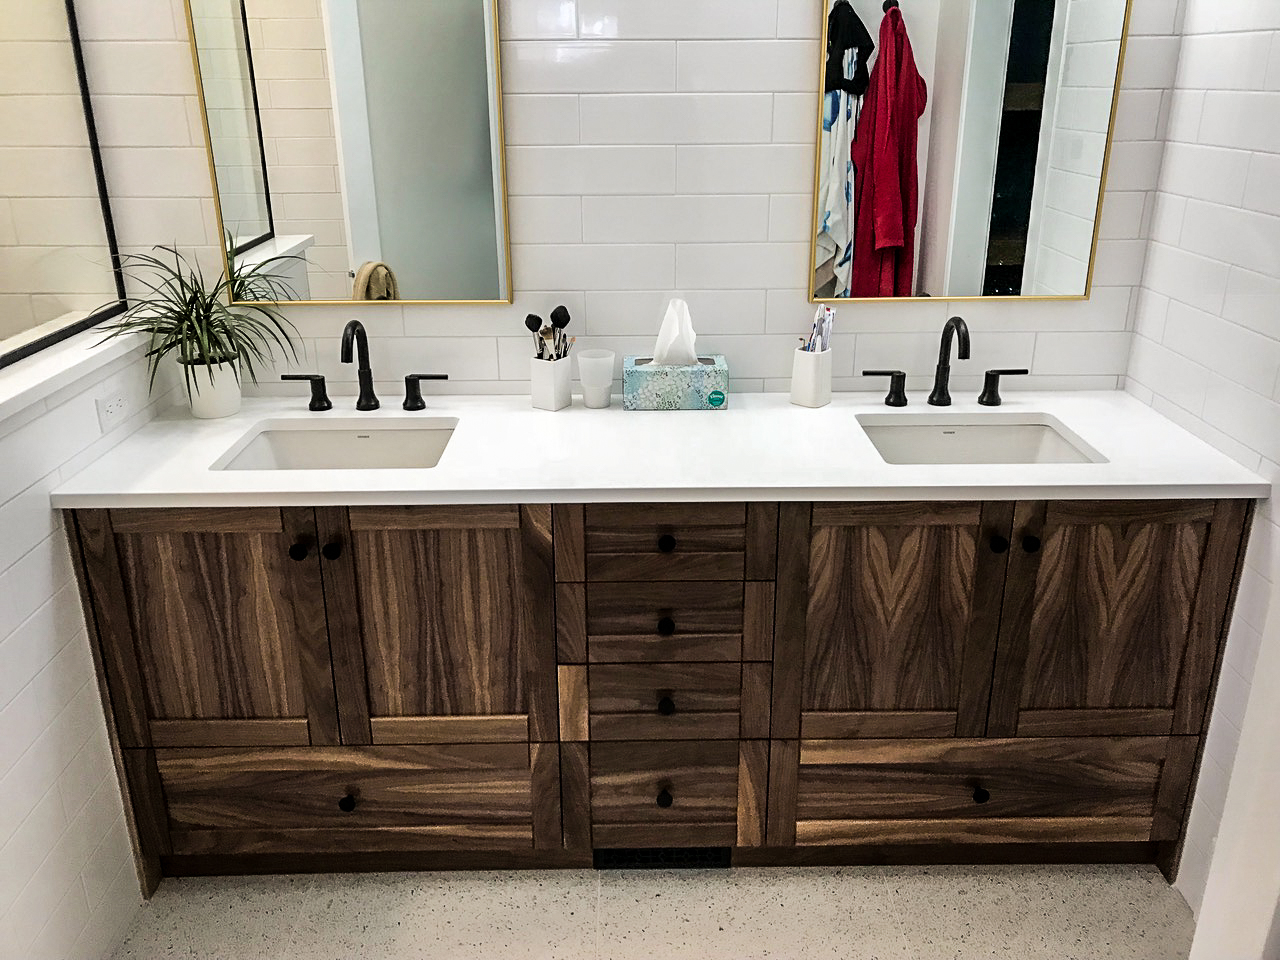 A bathroom renovation by Marden Construction before we moved to Lethbridge. Weathered and organic look to the custom cabinets. Polished counter tops and a modern finish.